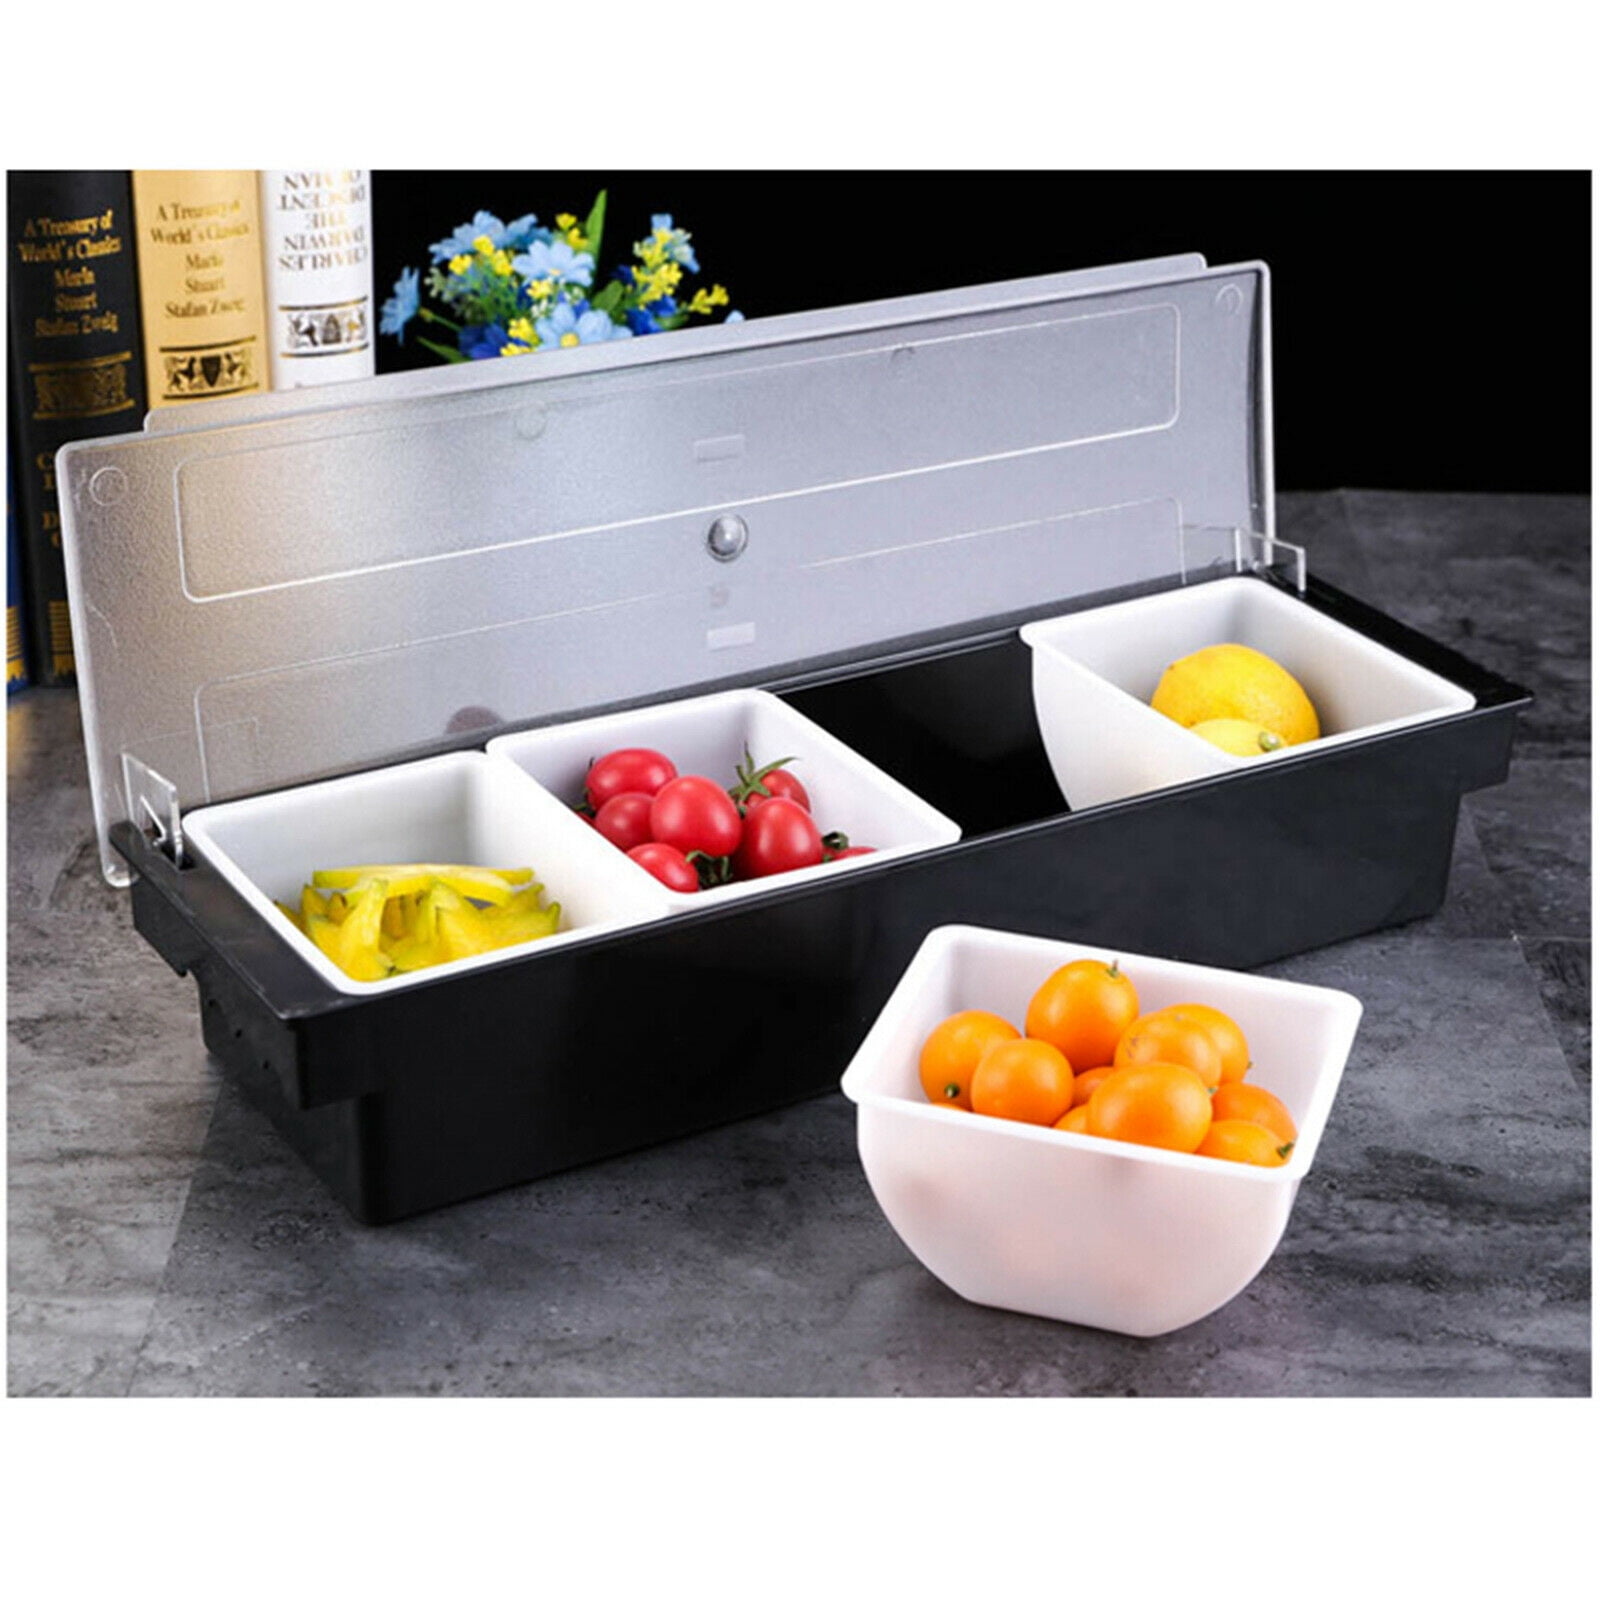 2 CHILLED Condiment Server Caddy Holder Dispenser Container Cooler Bar 5 Trays 